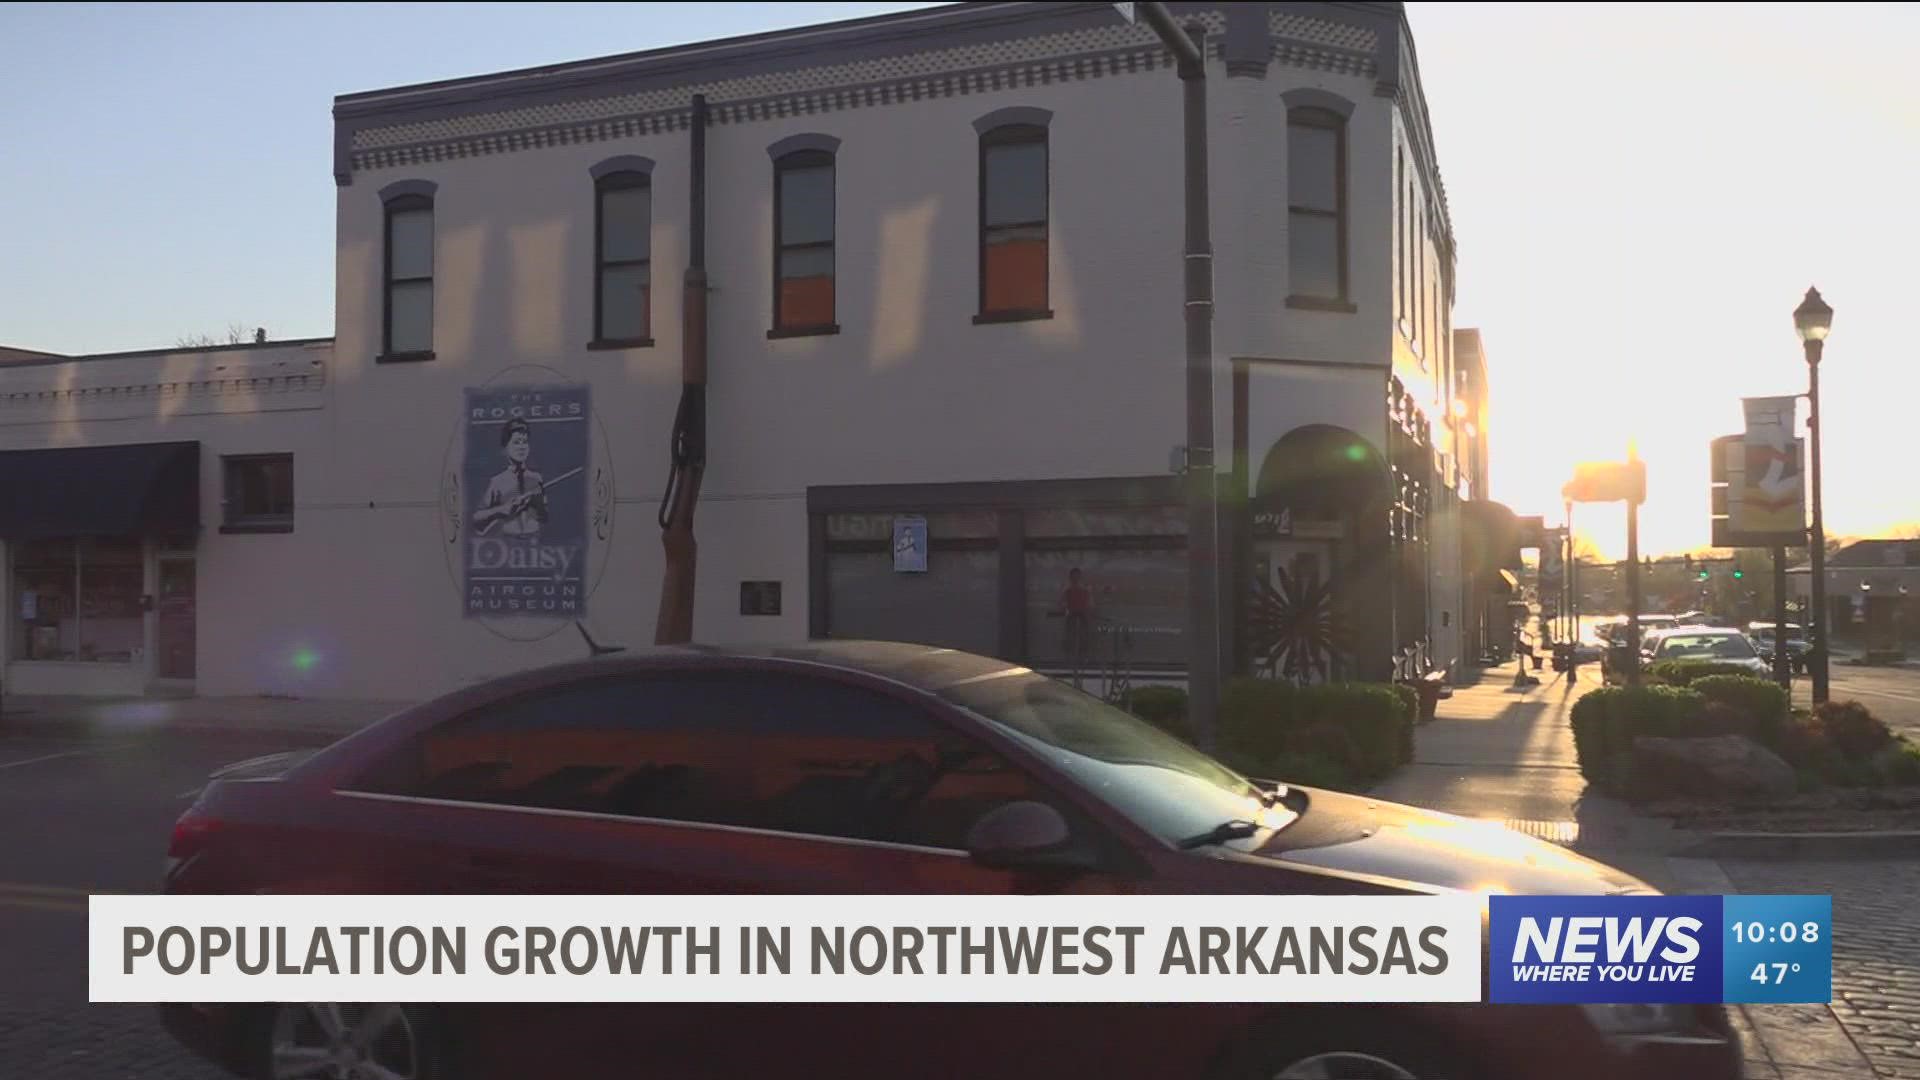 Northwest Arkansas is ranked 102 on a list of best places to live and ranked 31st on a list of the fastest-growing areas in the U.S.